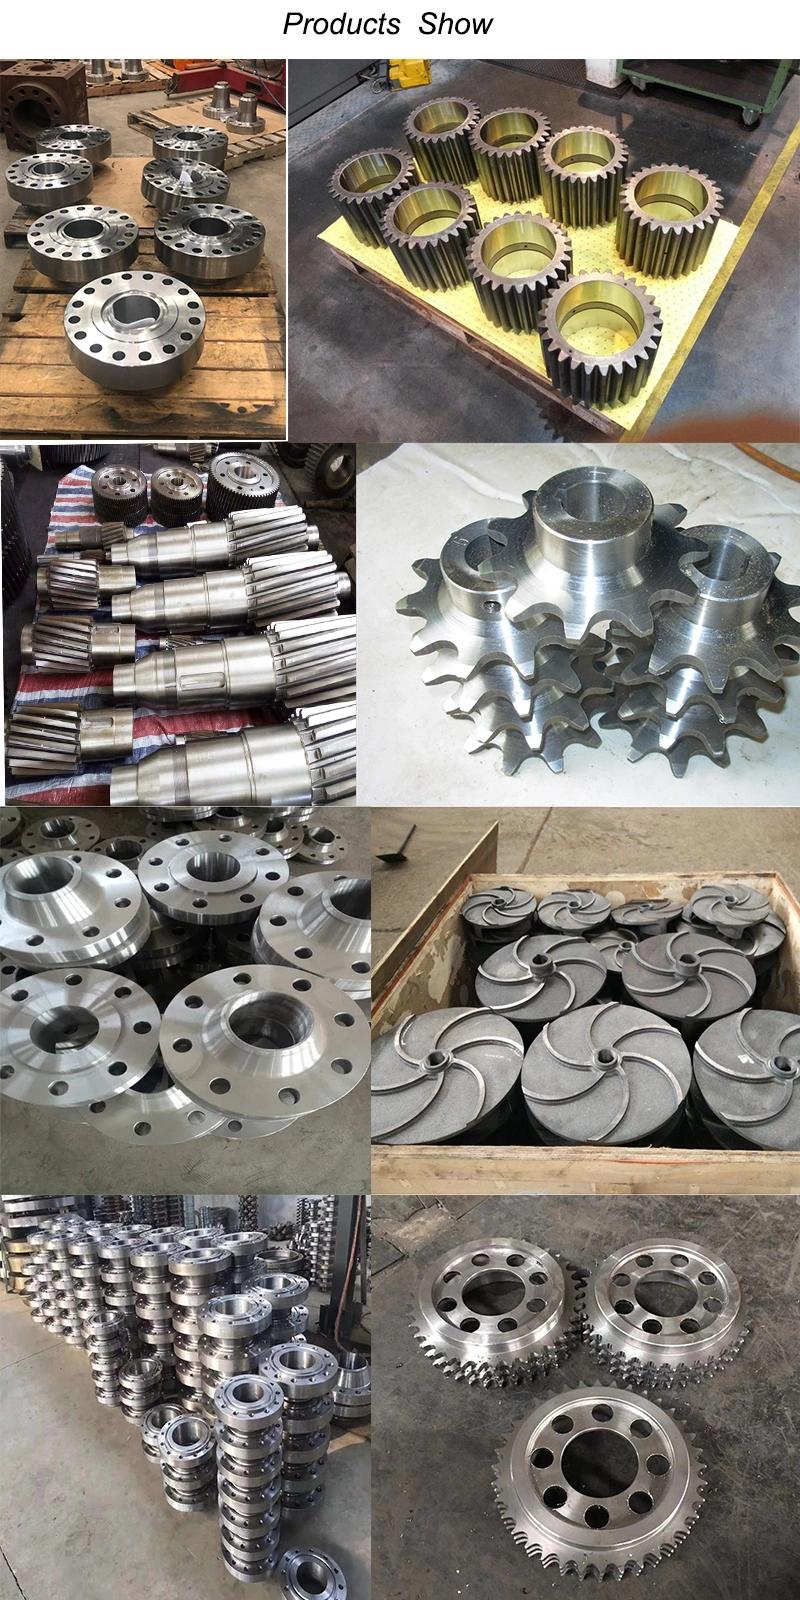 OEM Stainless Steel Impeller for Water Pump/Supercharger/Gas Turbine/Ship/Compressor/Auto Spare Parts in Investment/Lost Wax/Precision/Vacuum Casting